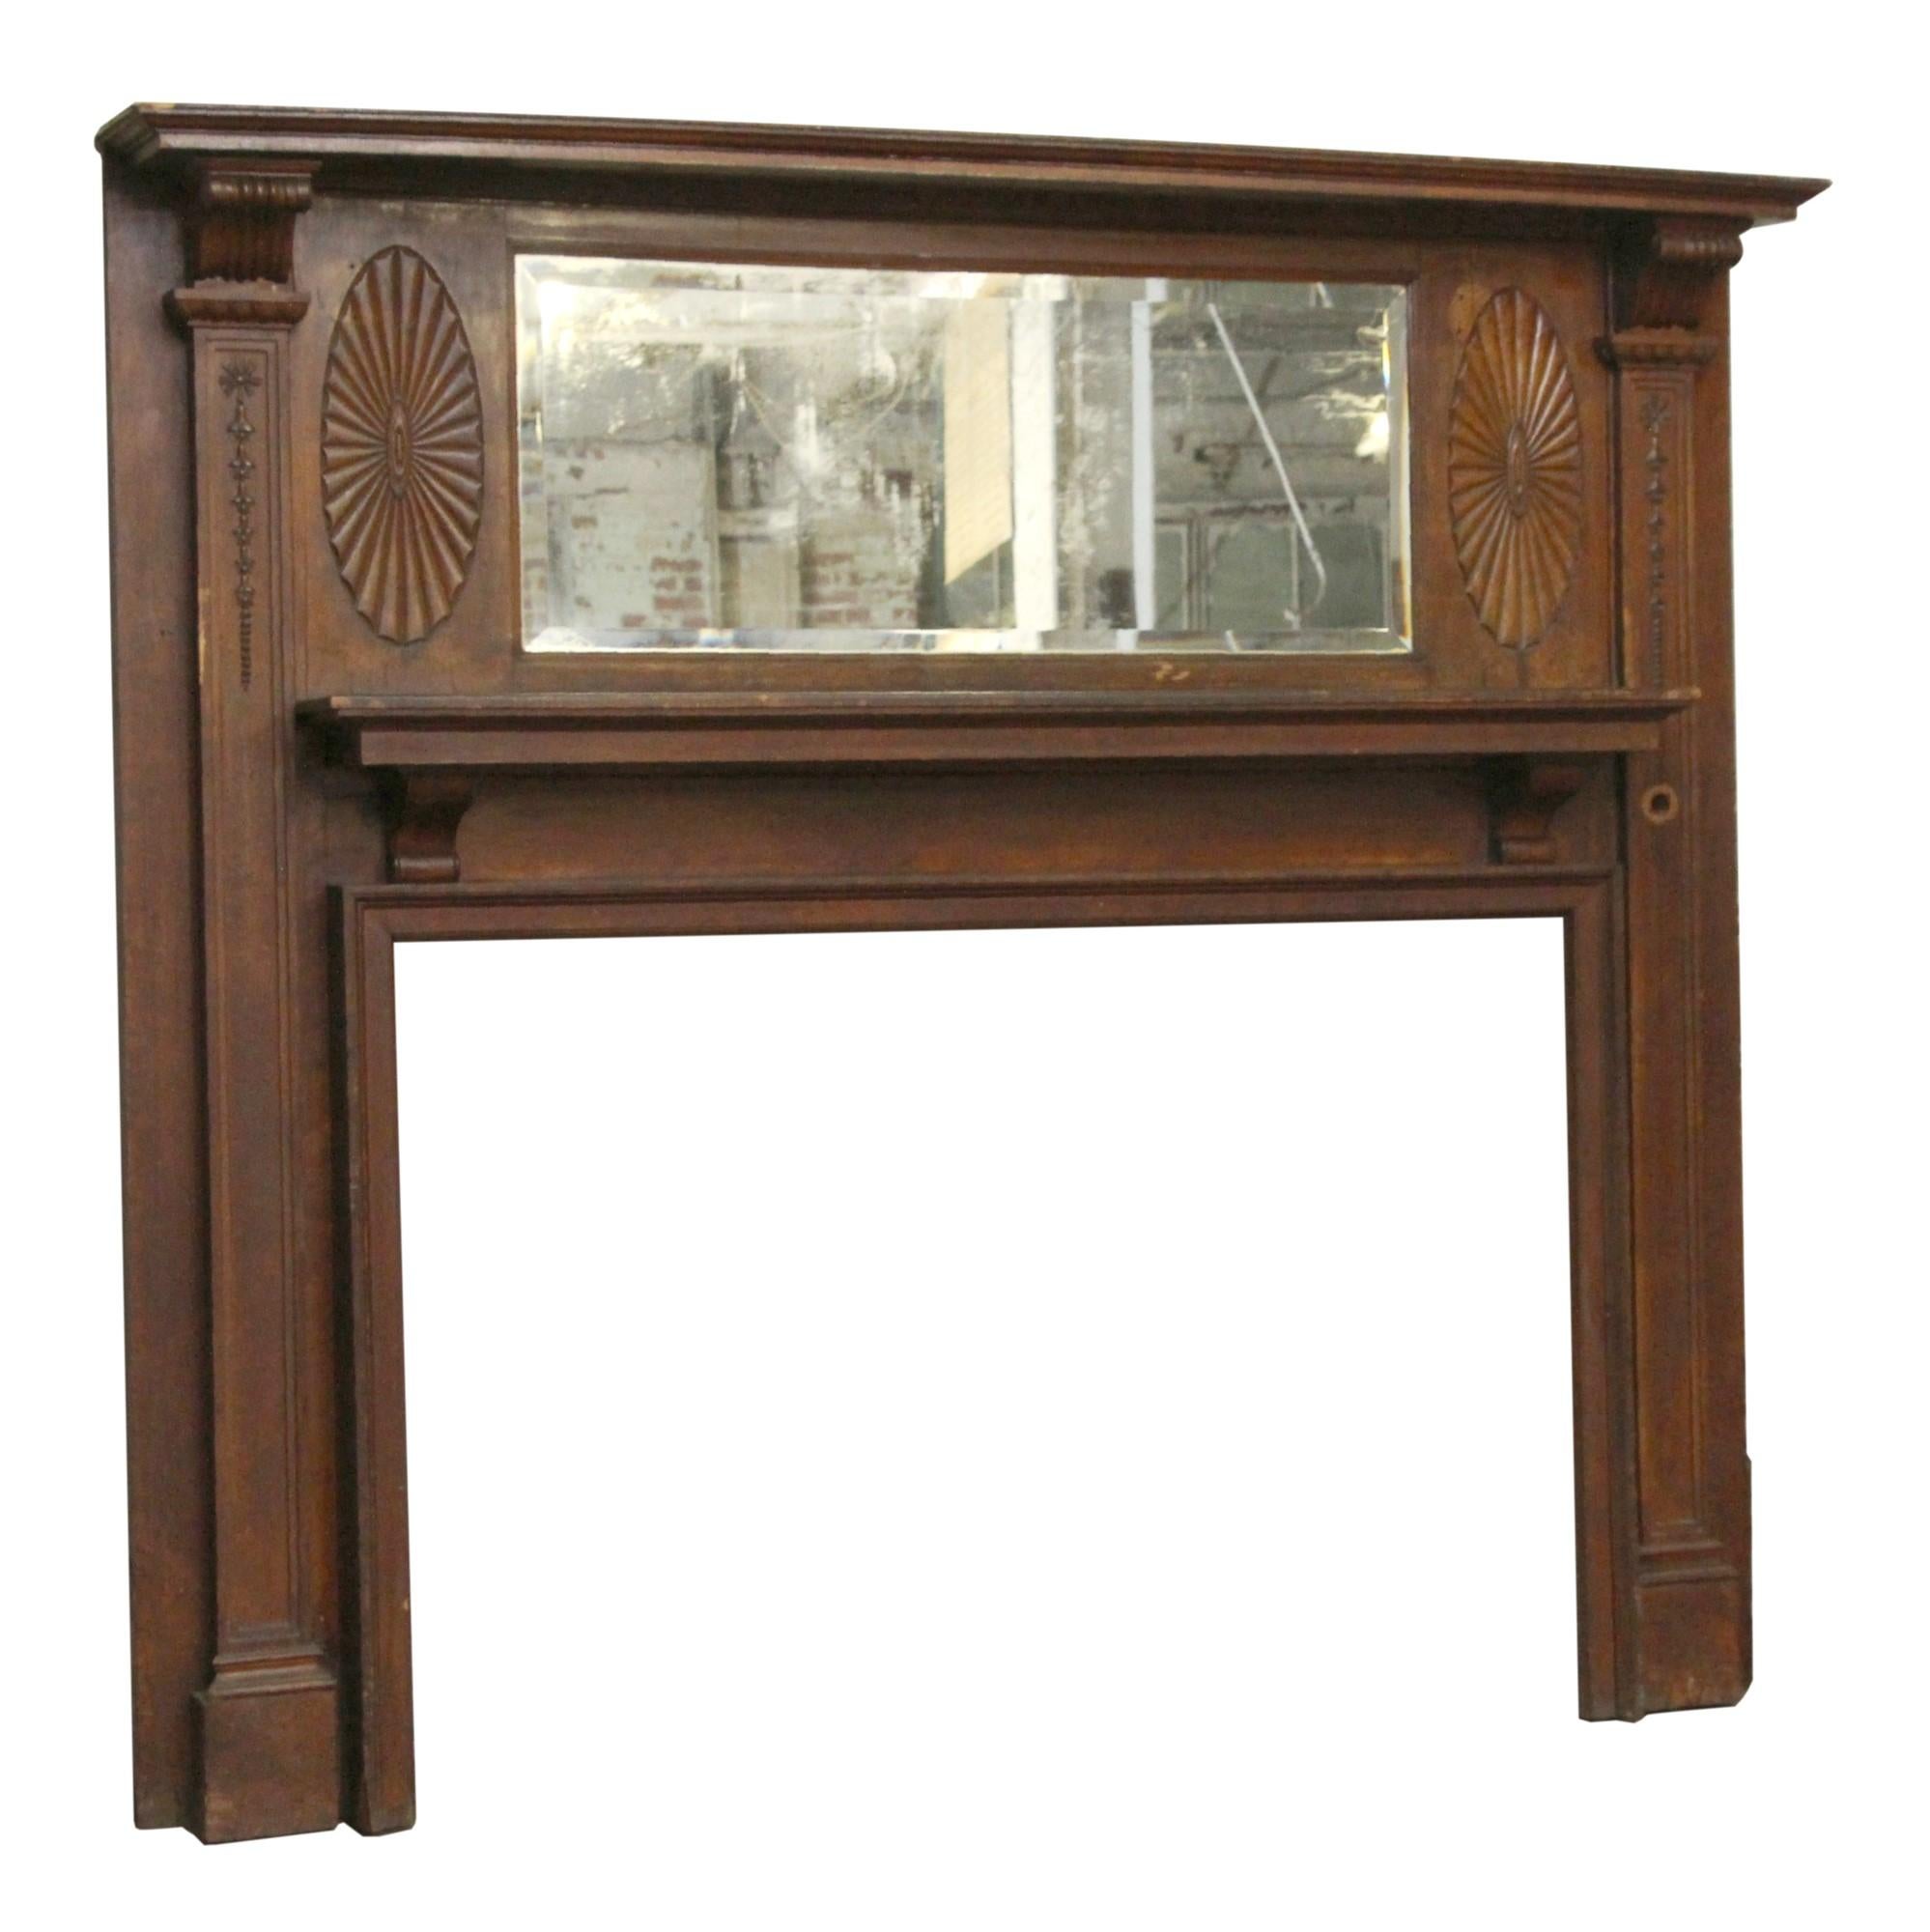 Dark wood tone traditional style mantel with horizontal beveled mirror and carved details from 1905. There is some wear and nicks in the wood from age and use. This can be seen at our 400 Gilligan St location in Scranton, PA.